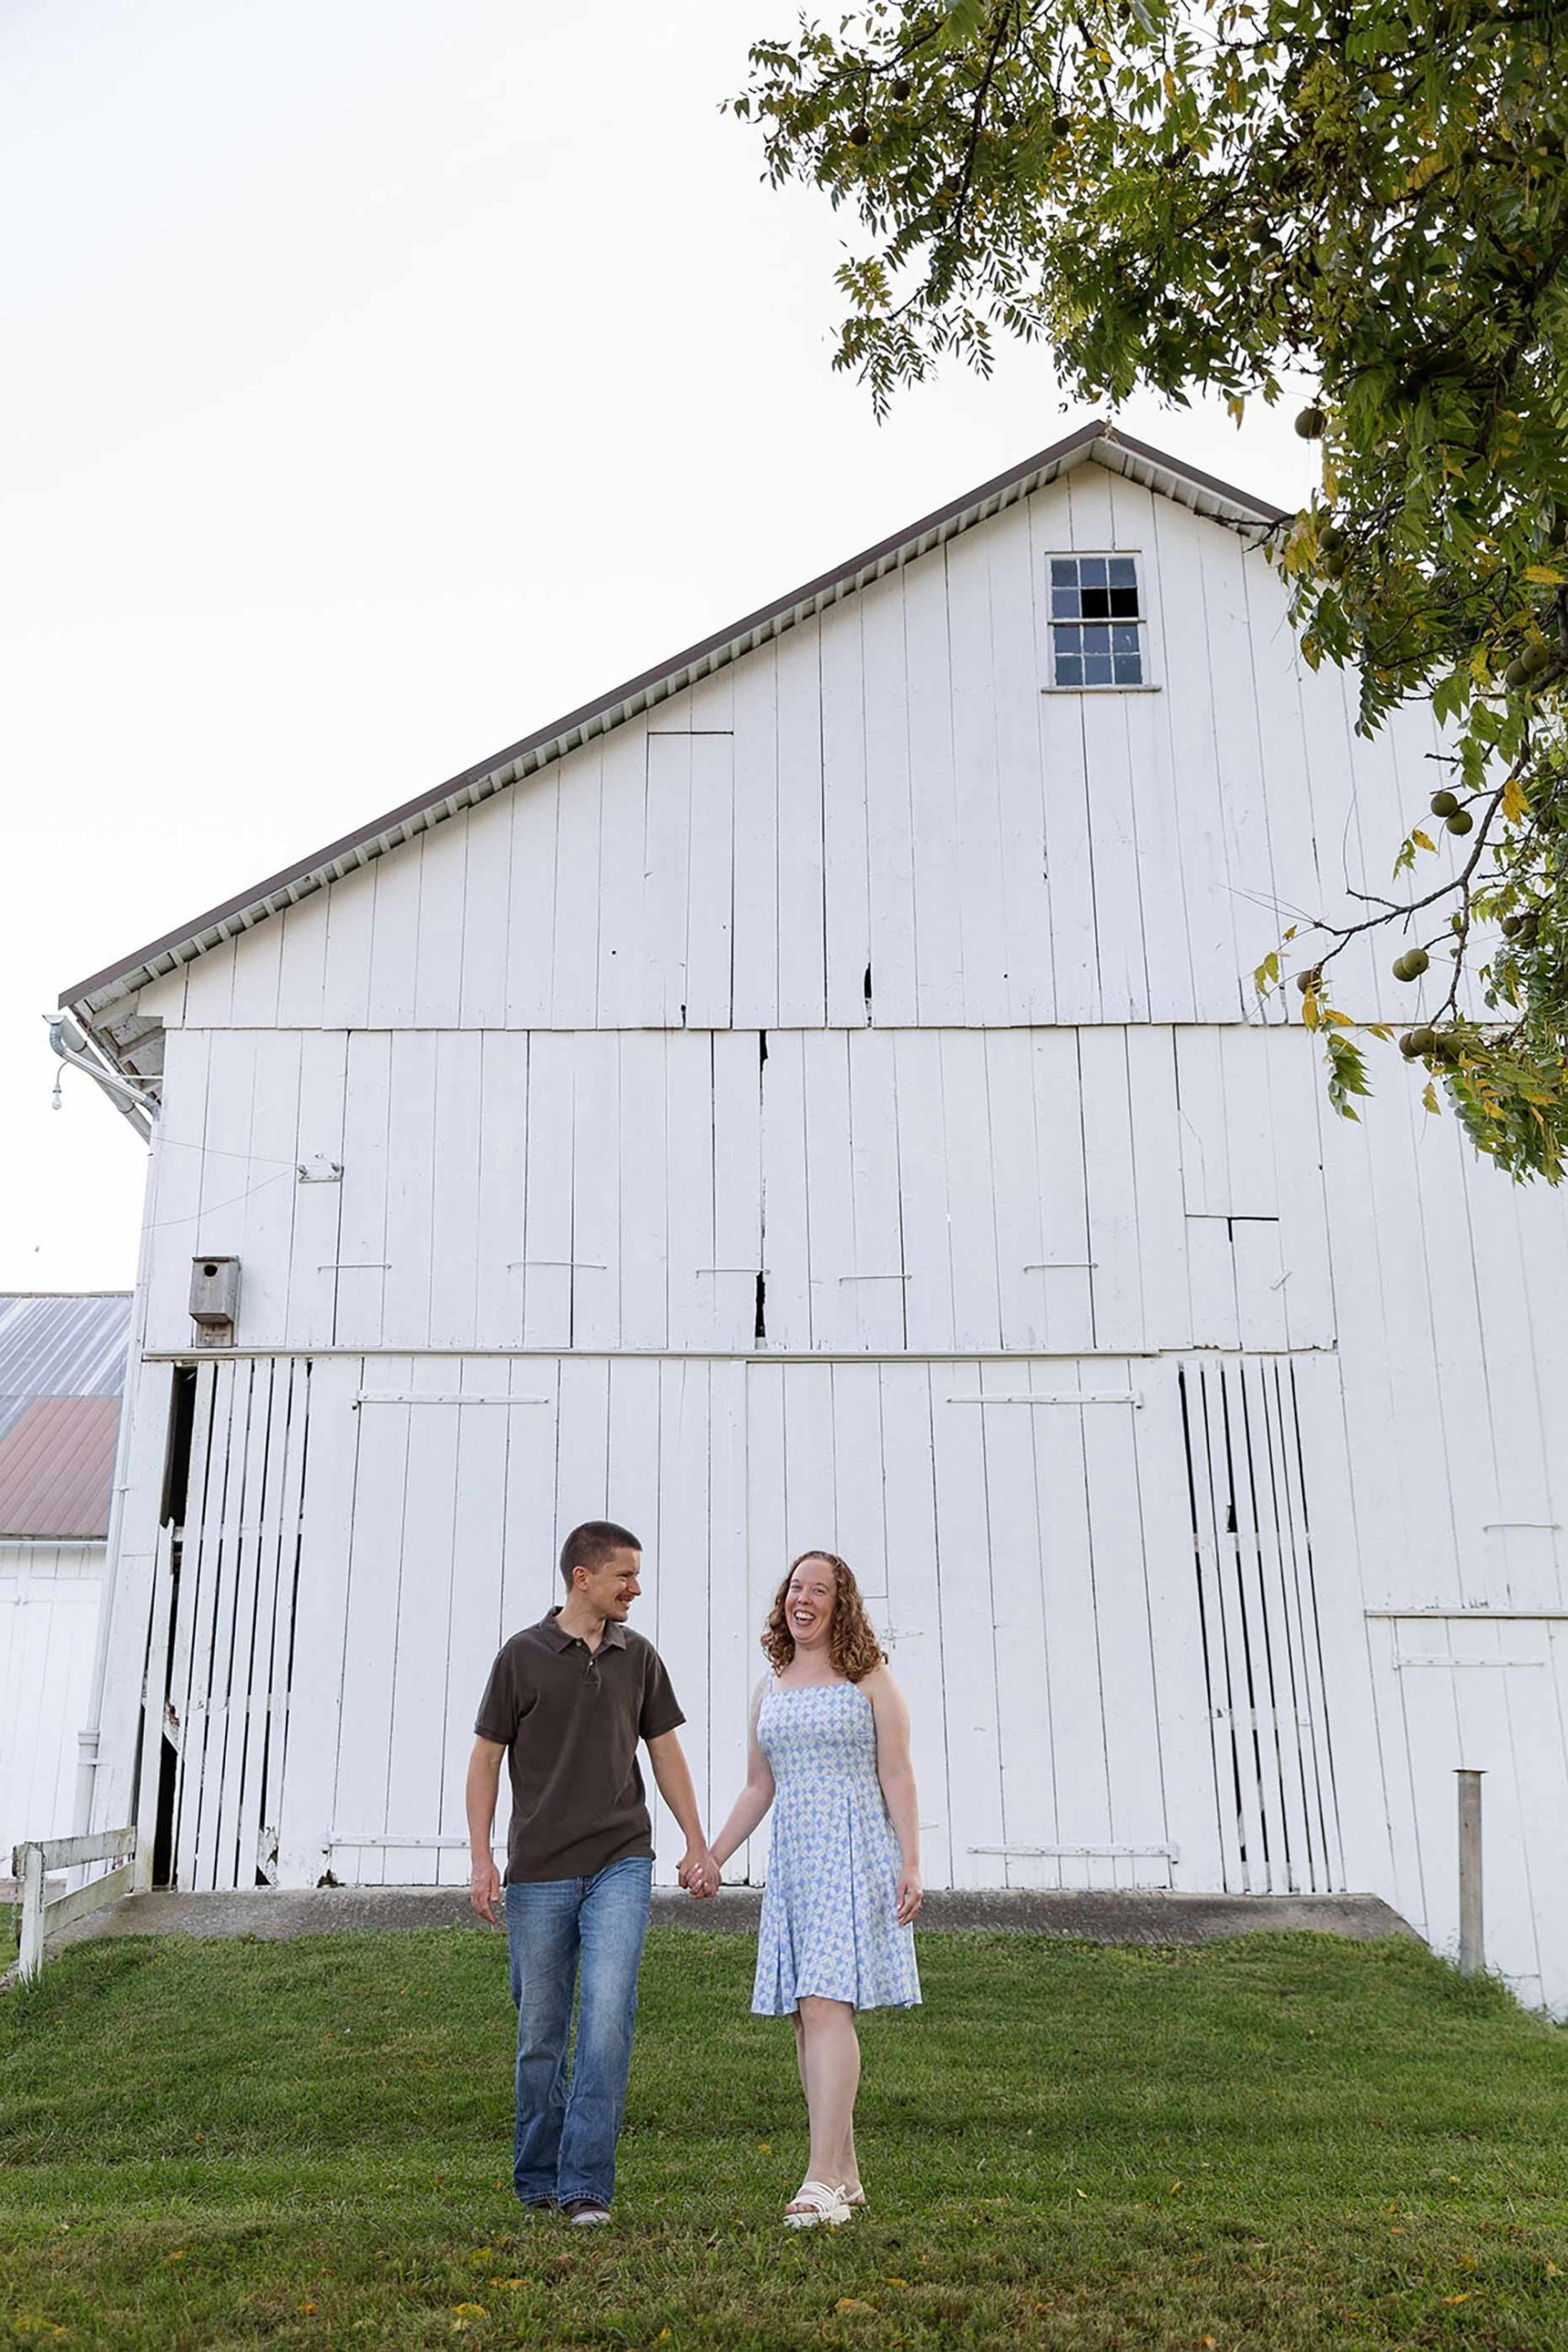 Walking and laughing in front of a white barn 